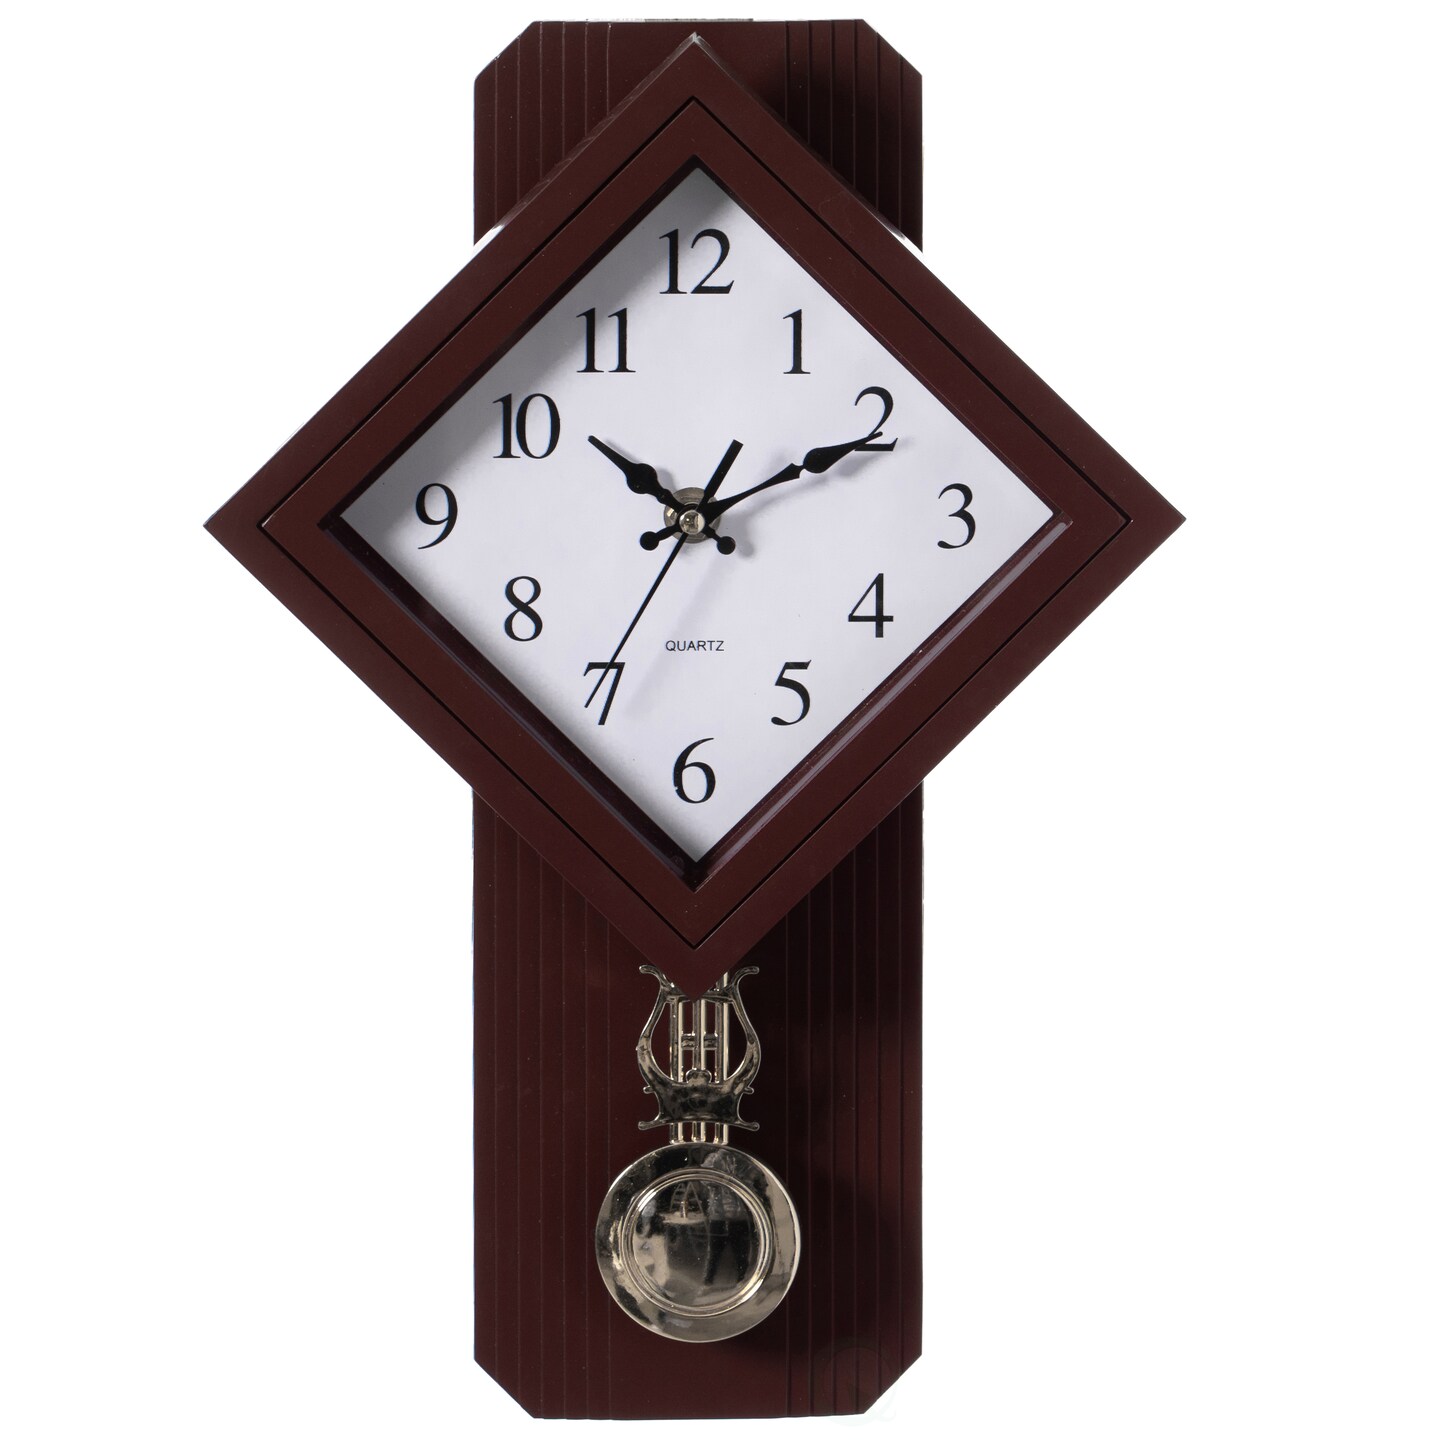 Wood-Look Pendulum Plastic Wall Clock, Vintage Farmhouse Decor for Living Room, Kitchen, or Dining Room, Silent Clock, Battery Powered, Large Decorative Wall Clock, Easy-to-Read